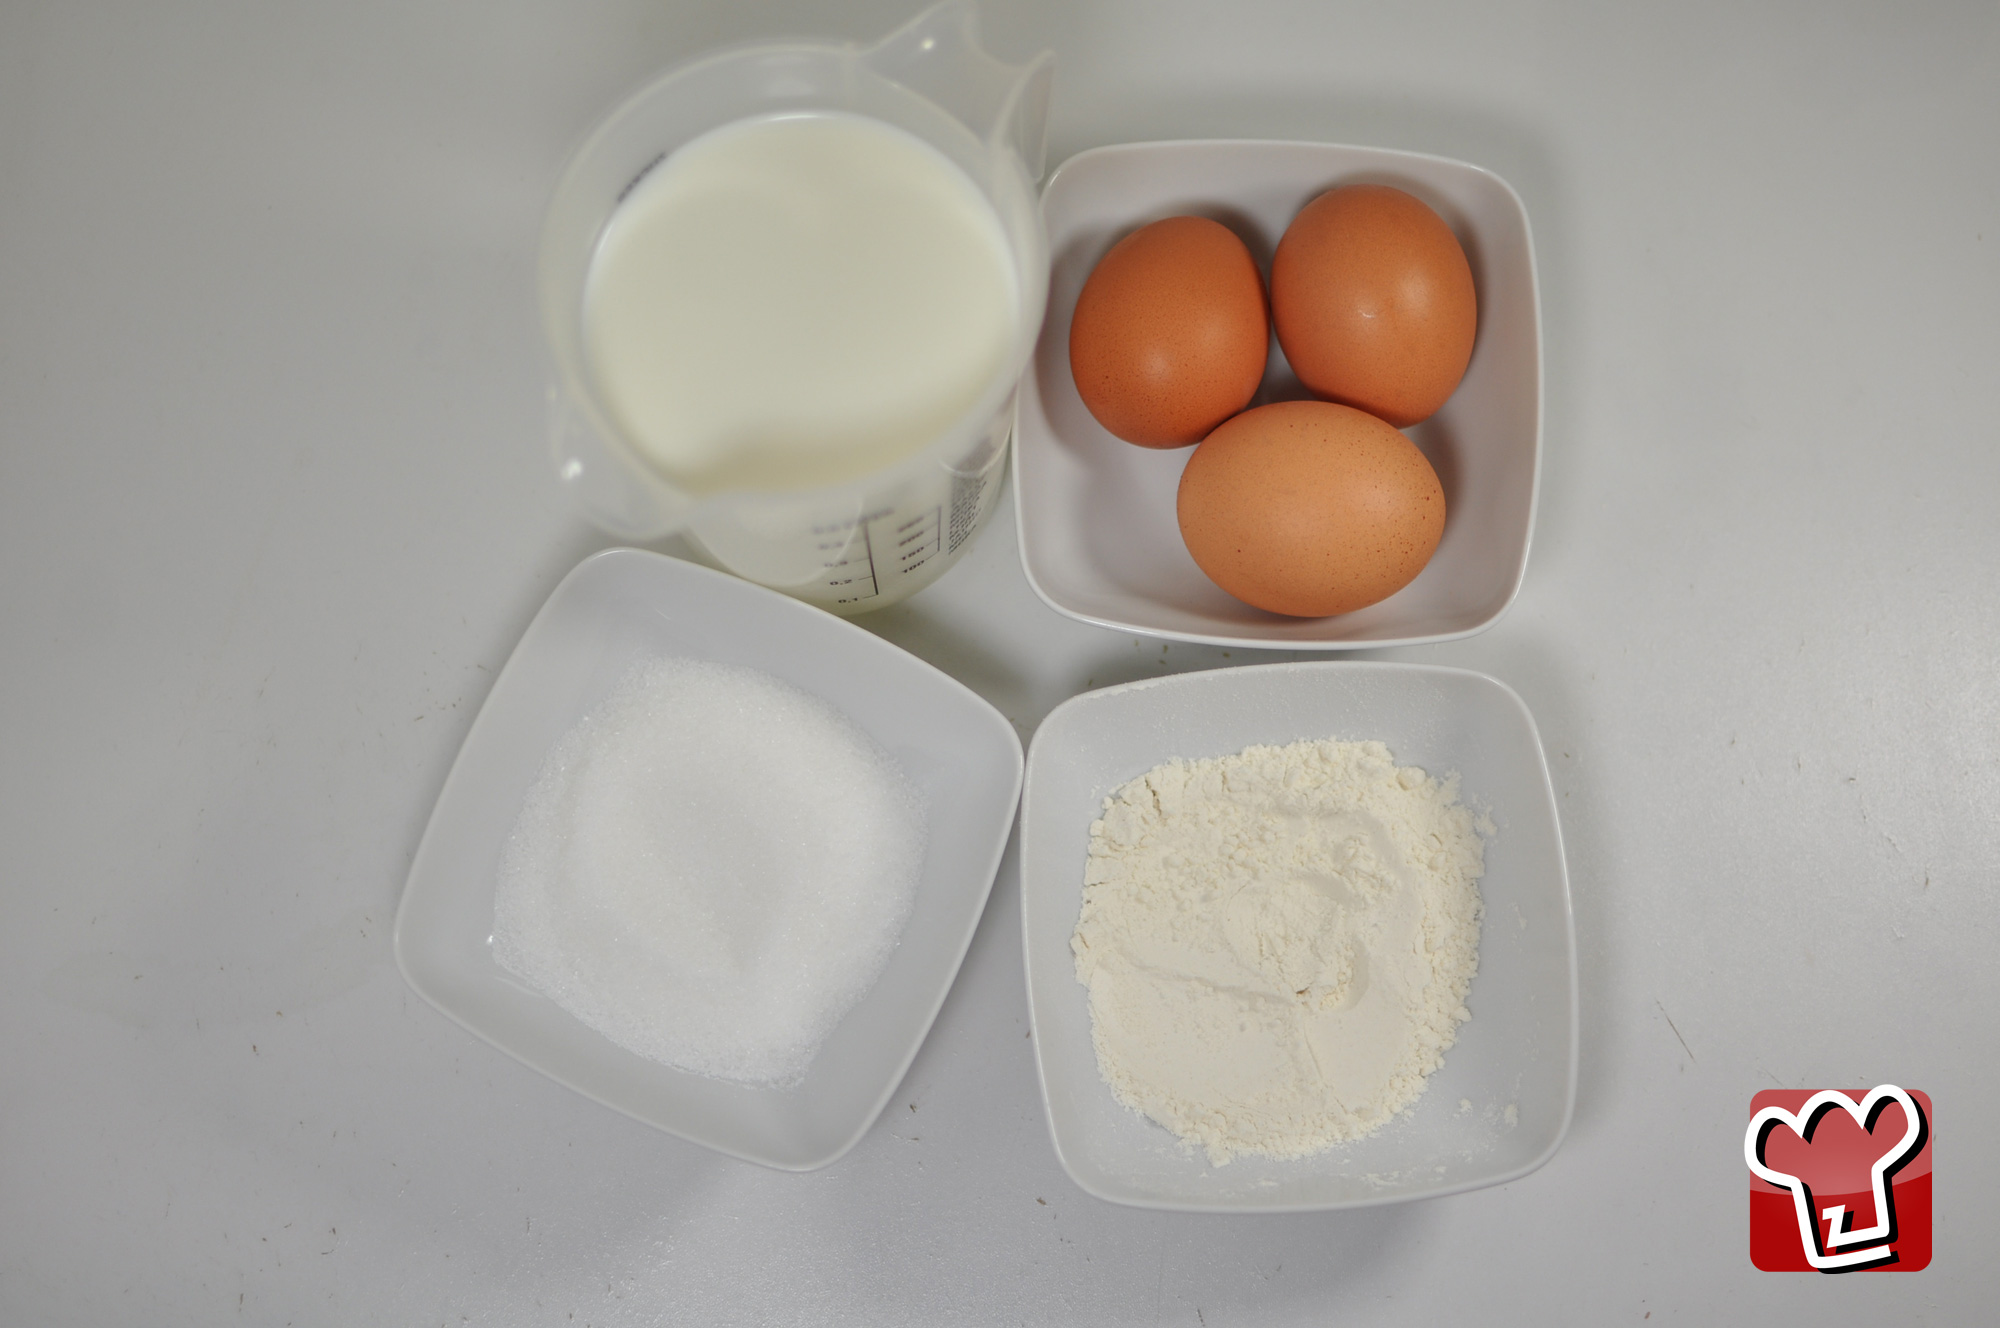 Ingredients for the custard